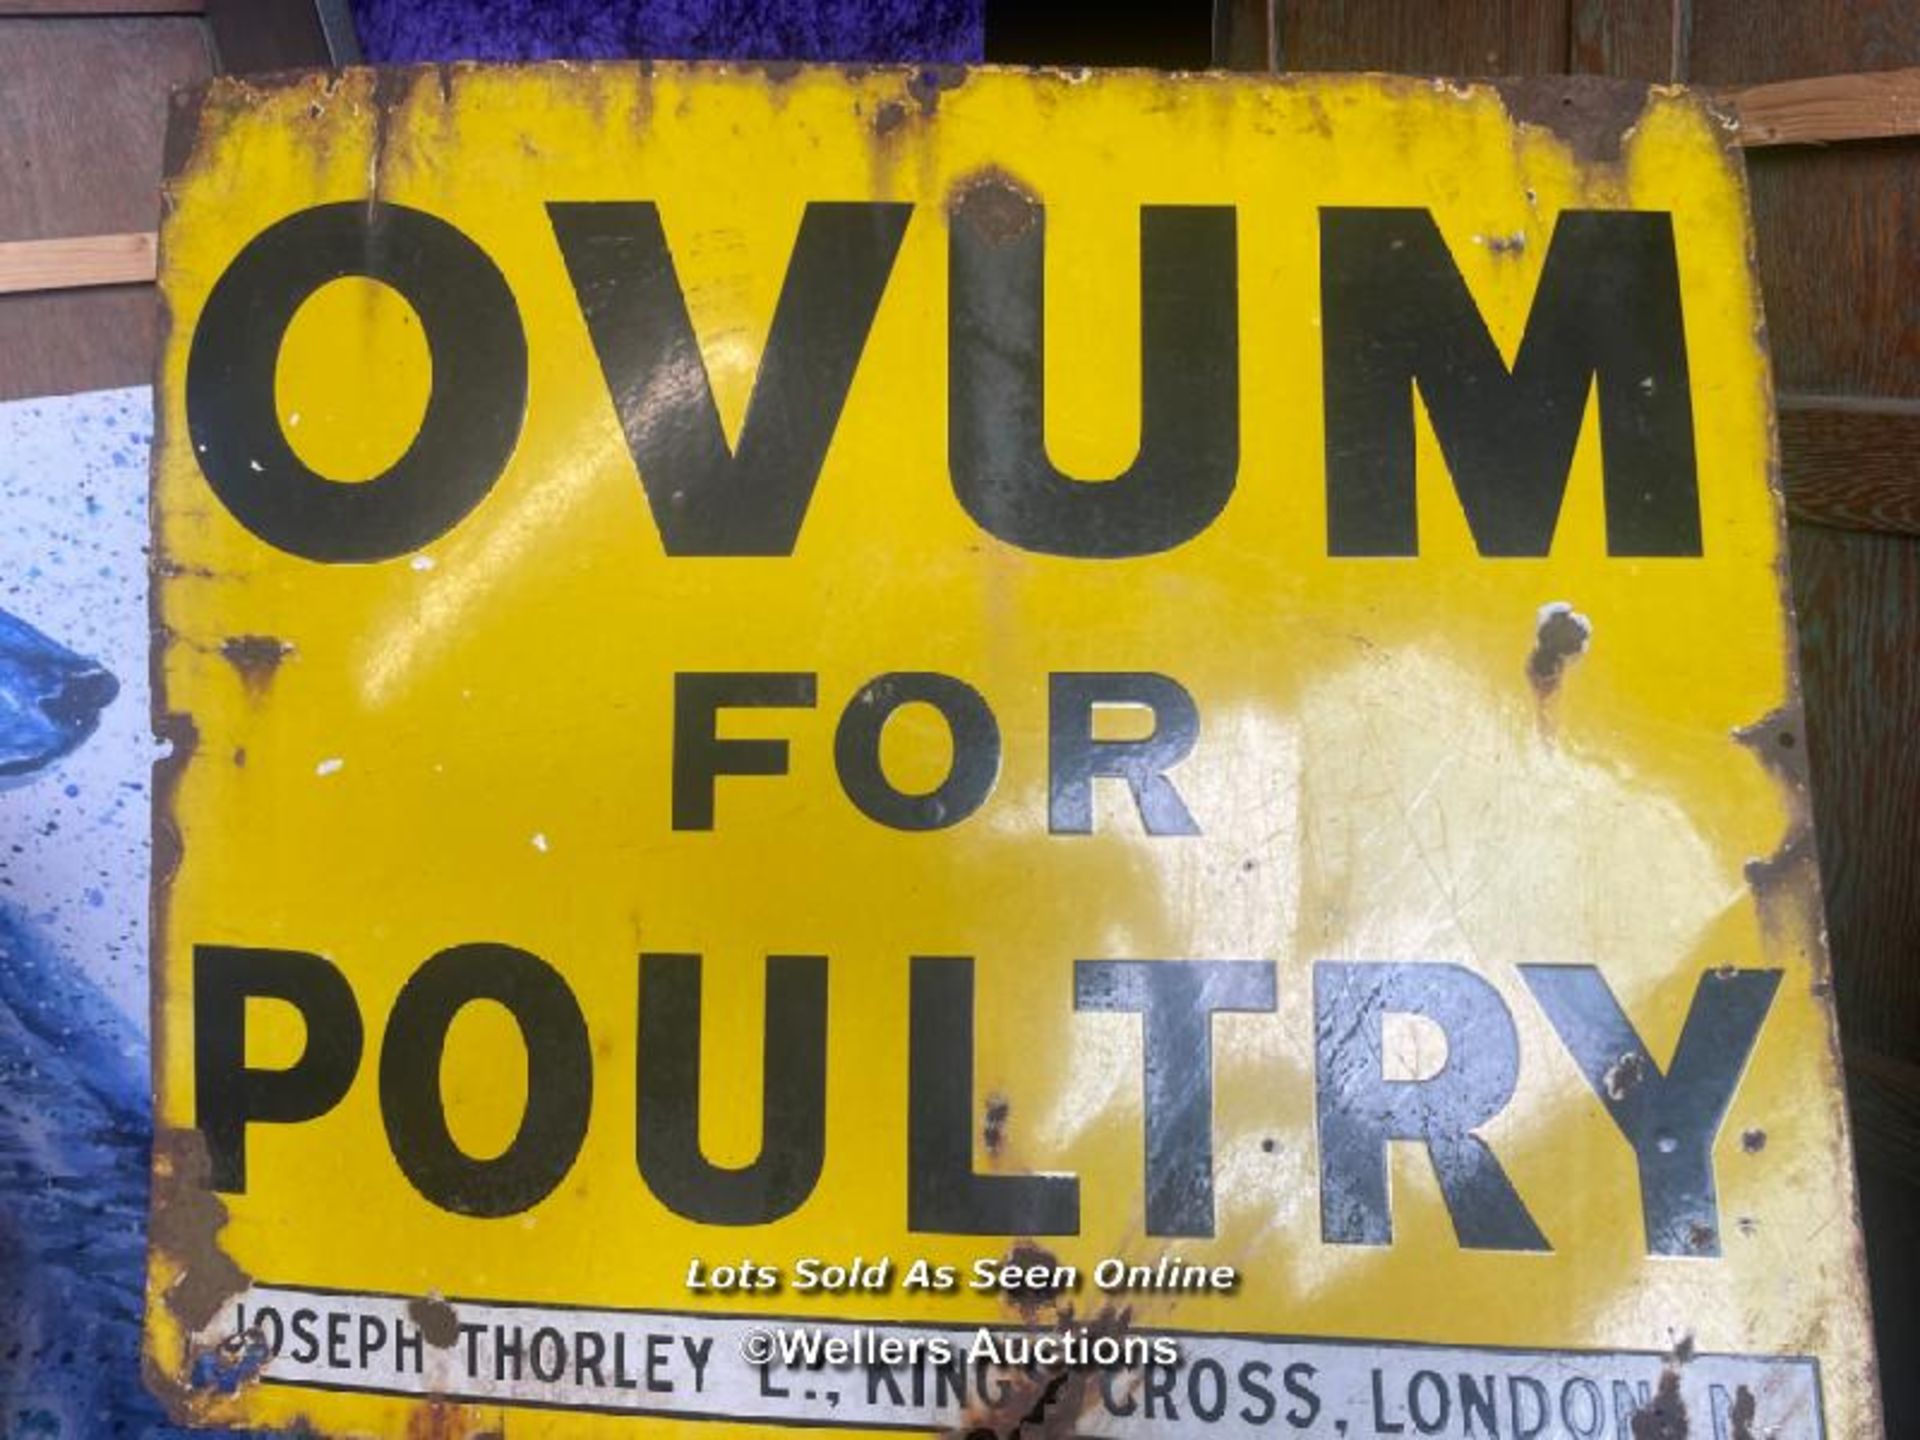 VINTAGE METAL SIGN "OVUM FOR POULTRY", 81 X 68.5CM